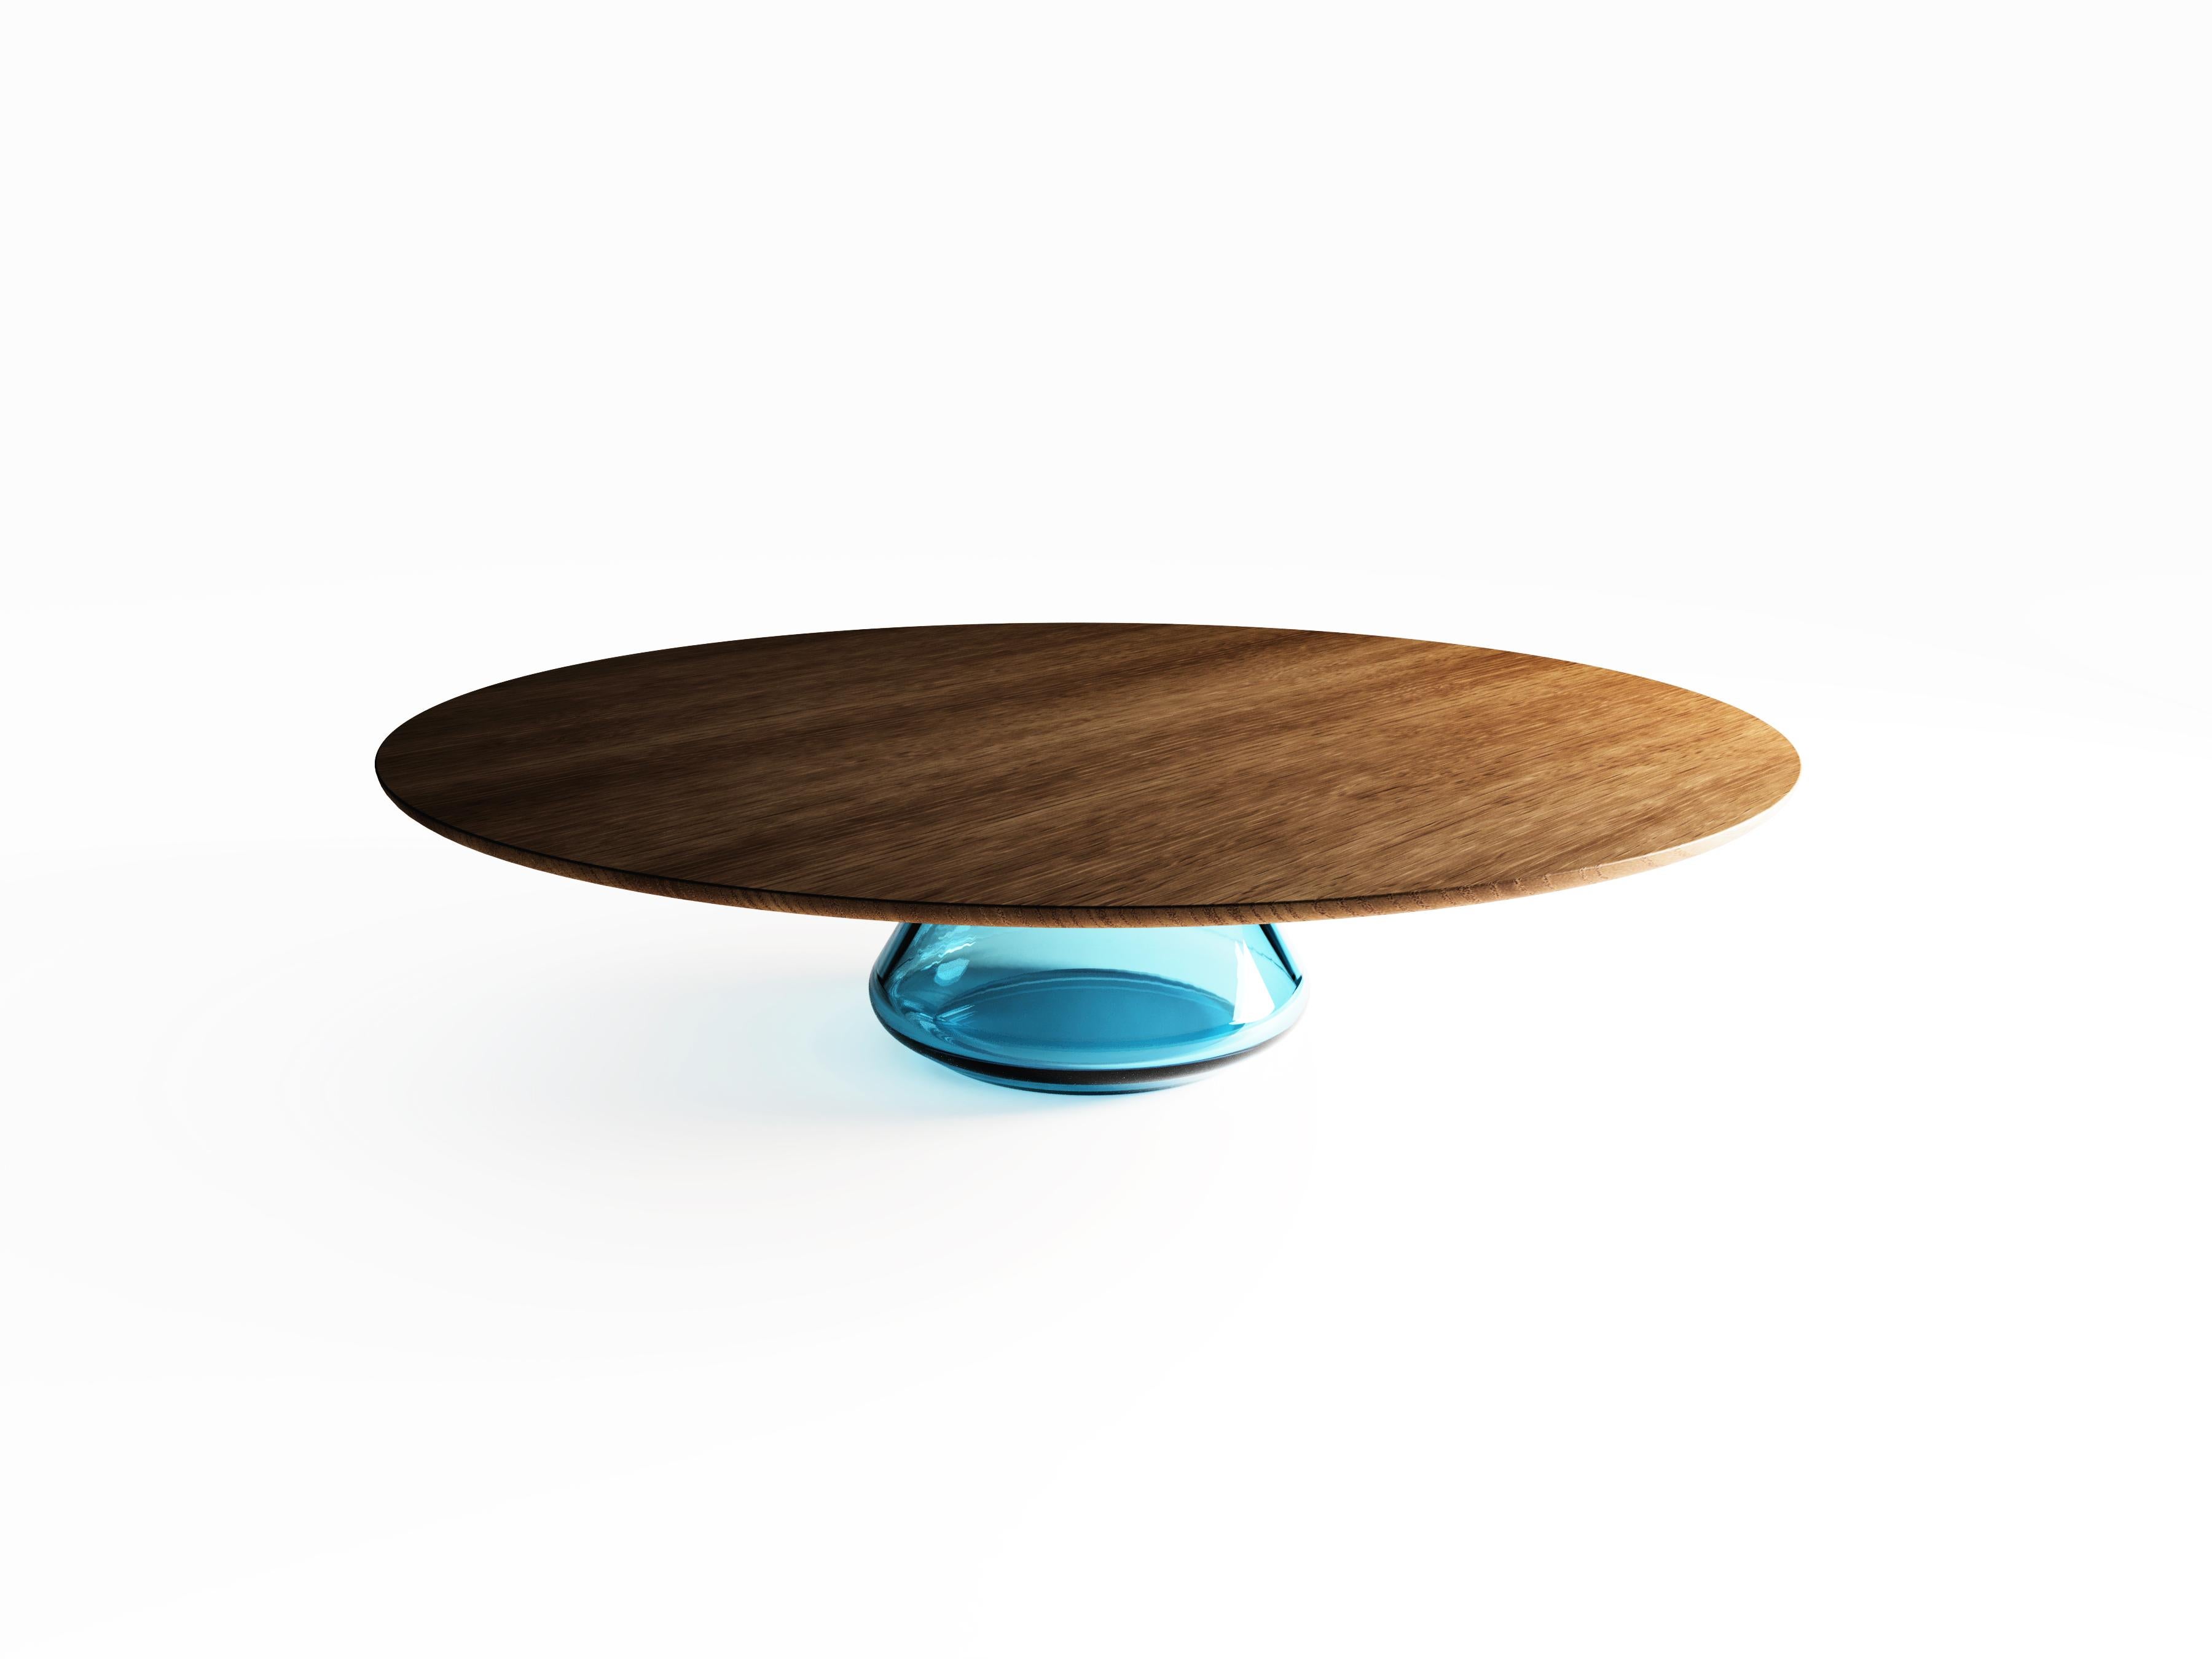 The Total Eclipse of every interior? With this amazing table everything is possible as with its minimalist style it will definitely eclipse all things around, spreading its hidden beauty. Focusing on arresting things not seen from the very first